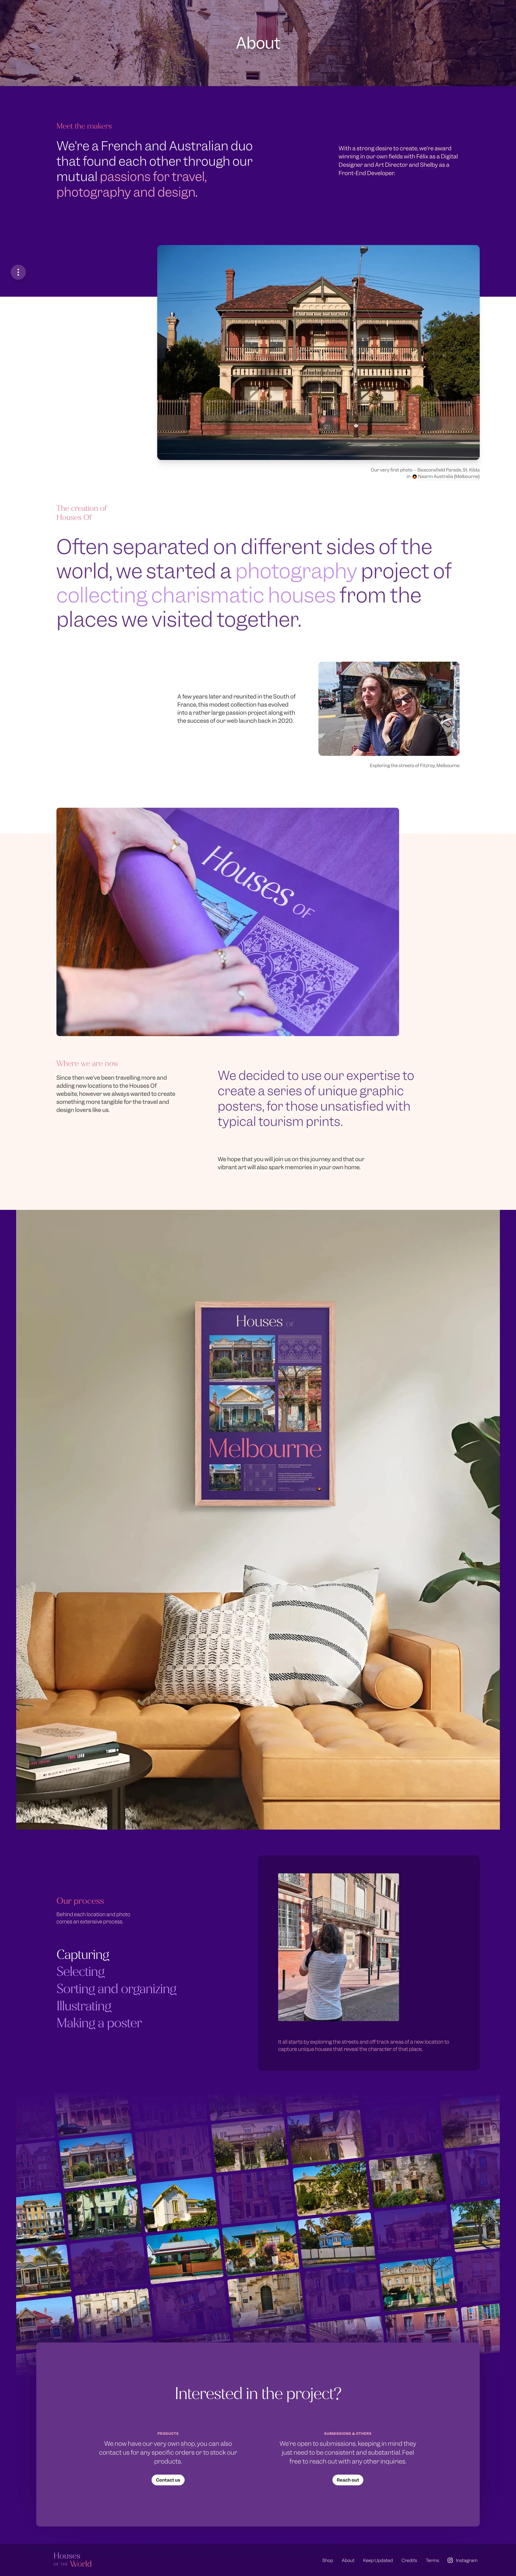 Houses Of The World Landing Page Example: Houses Of is a project showcasing charismatic houses around the world.